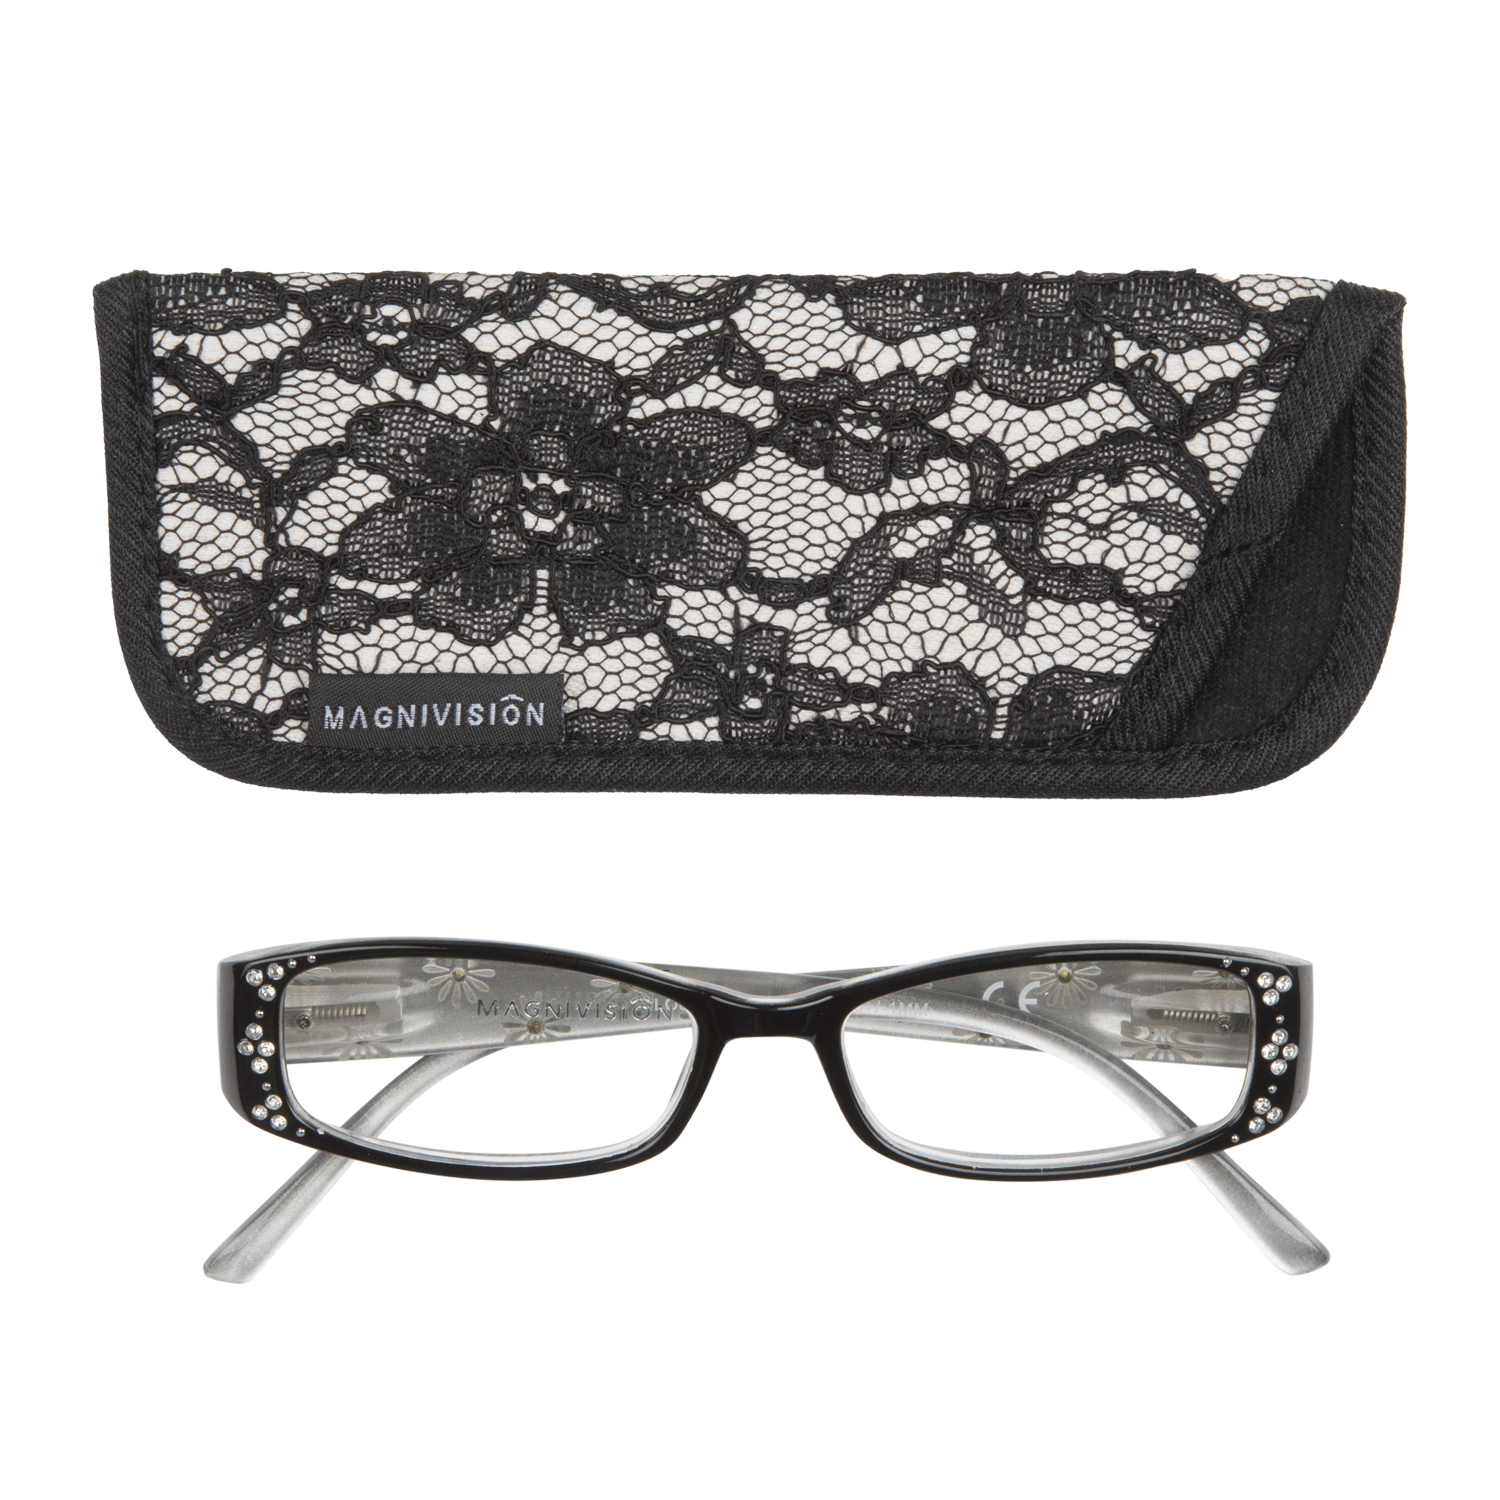 Tilly Magnivision Reading Glasses - 2.00 Image 2